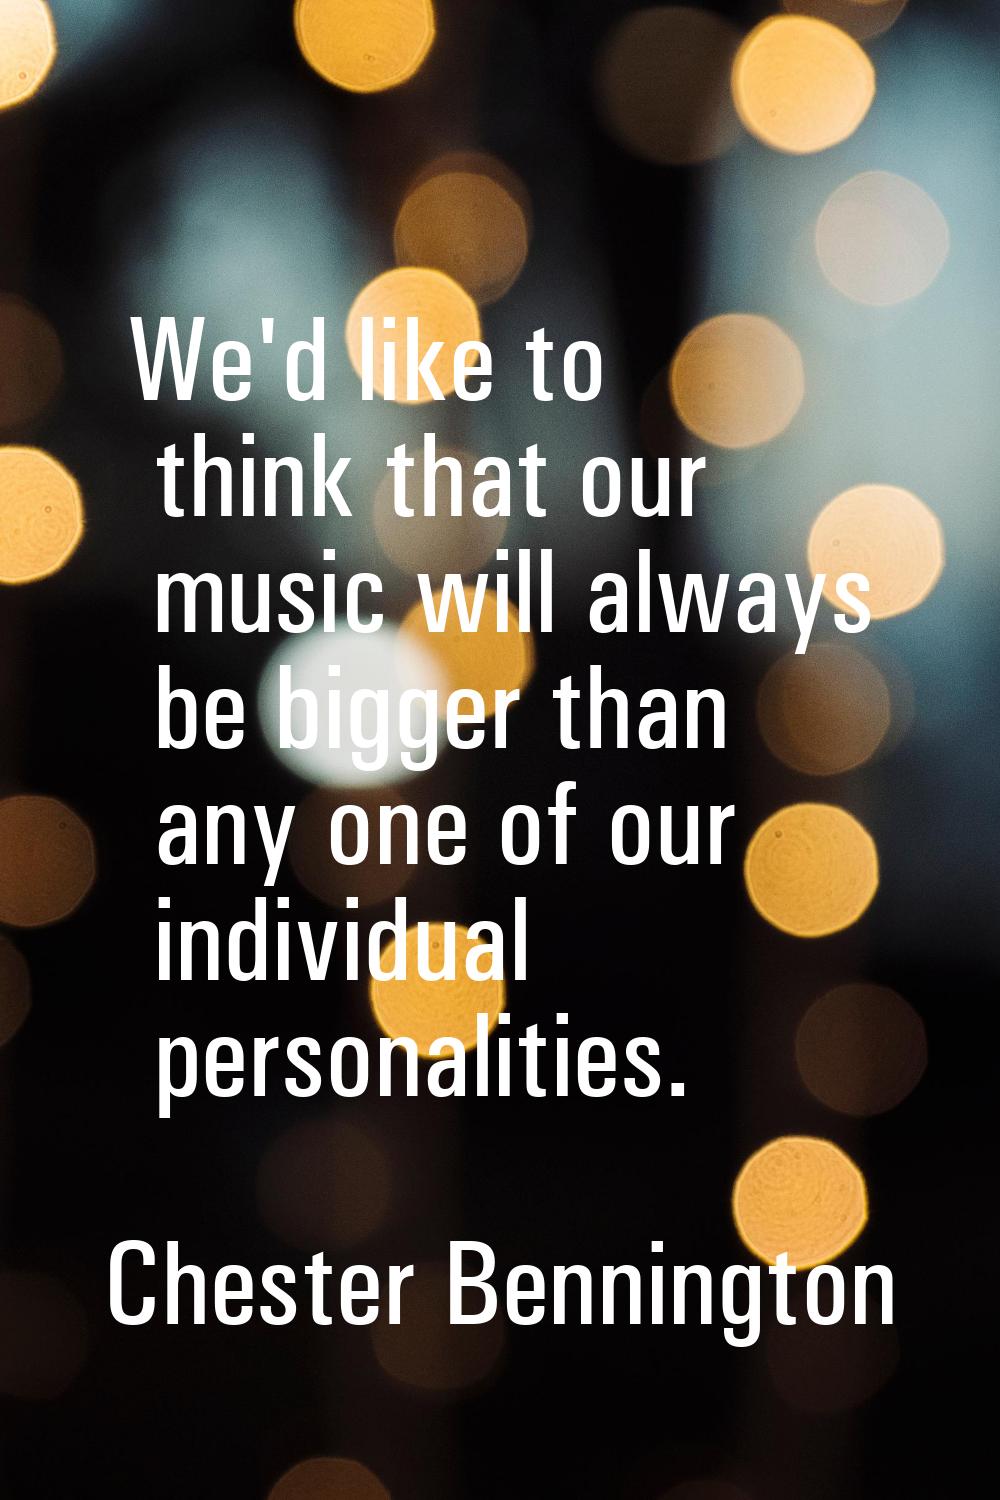 We'd like to think that our music will always be bigger than any one of our individual personalitie